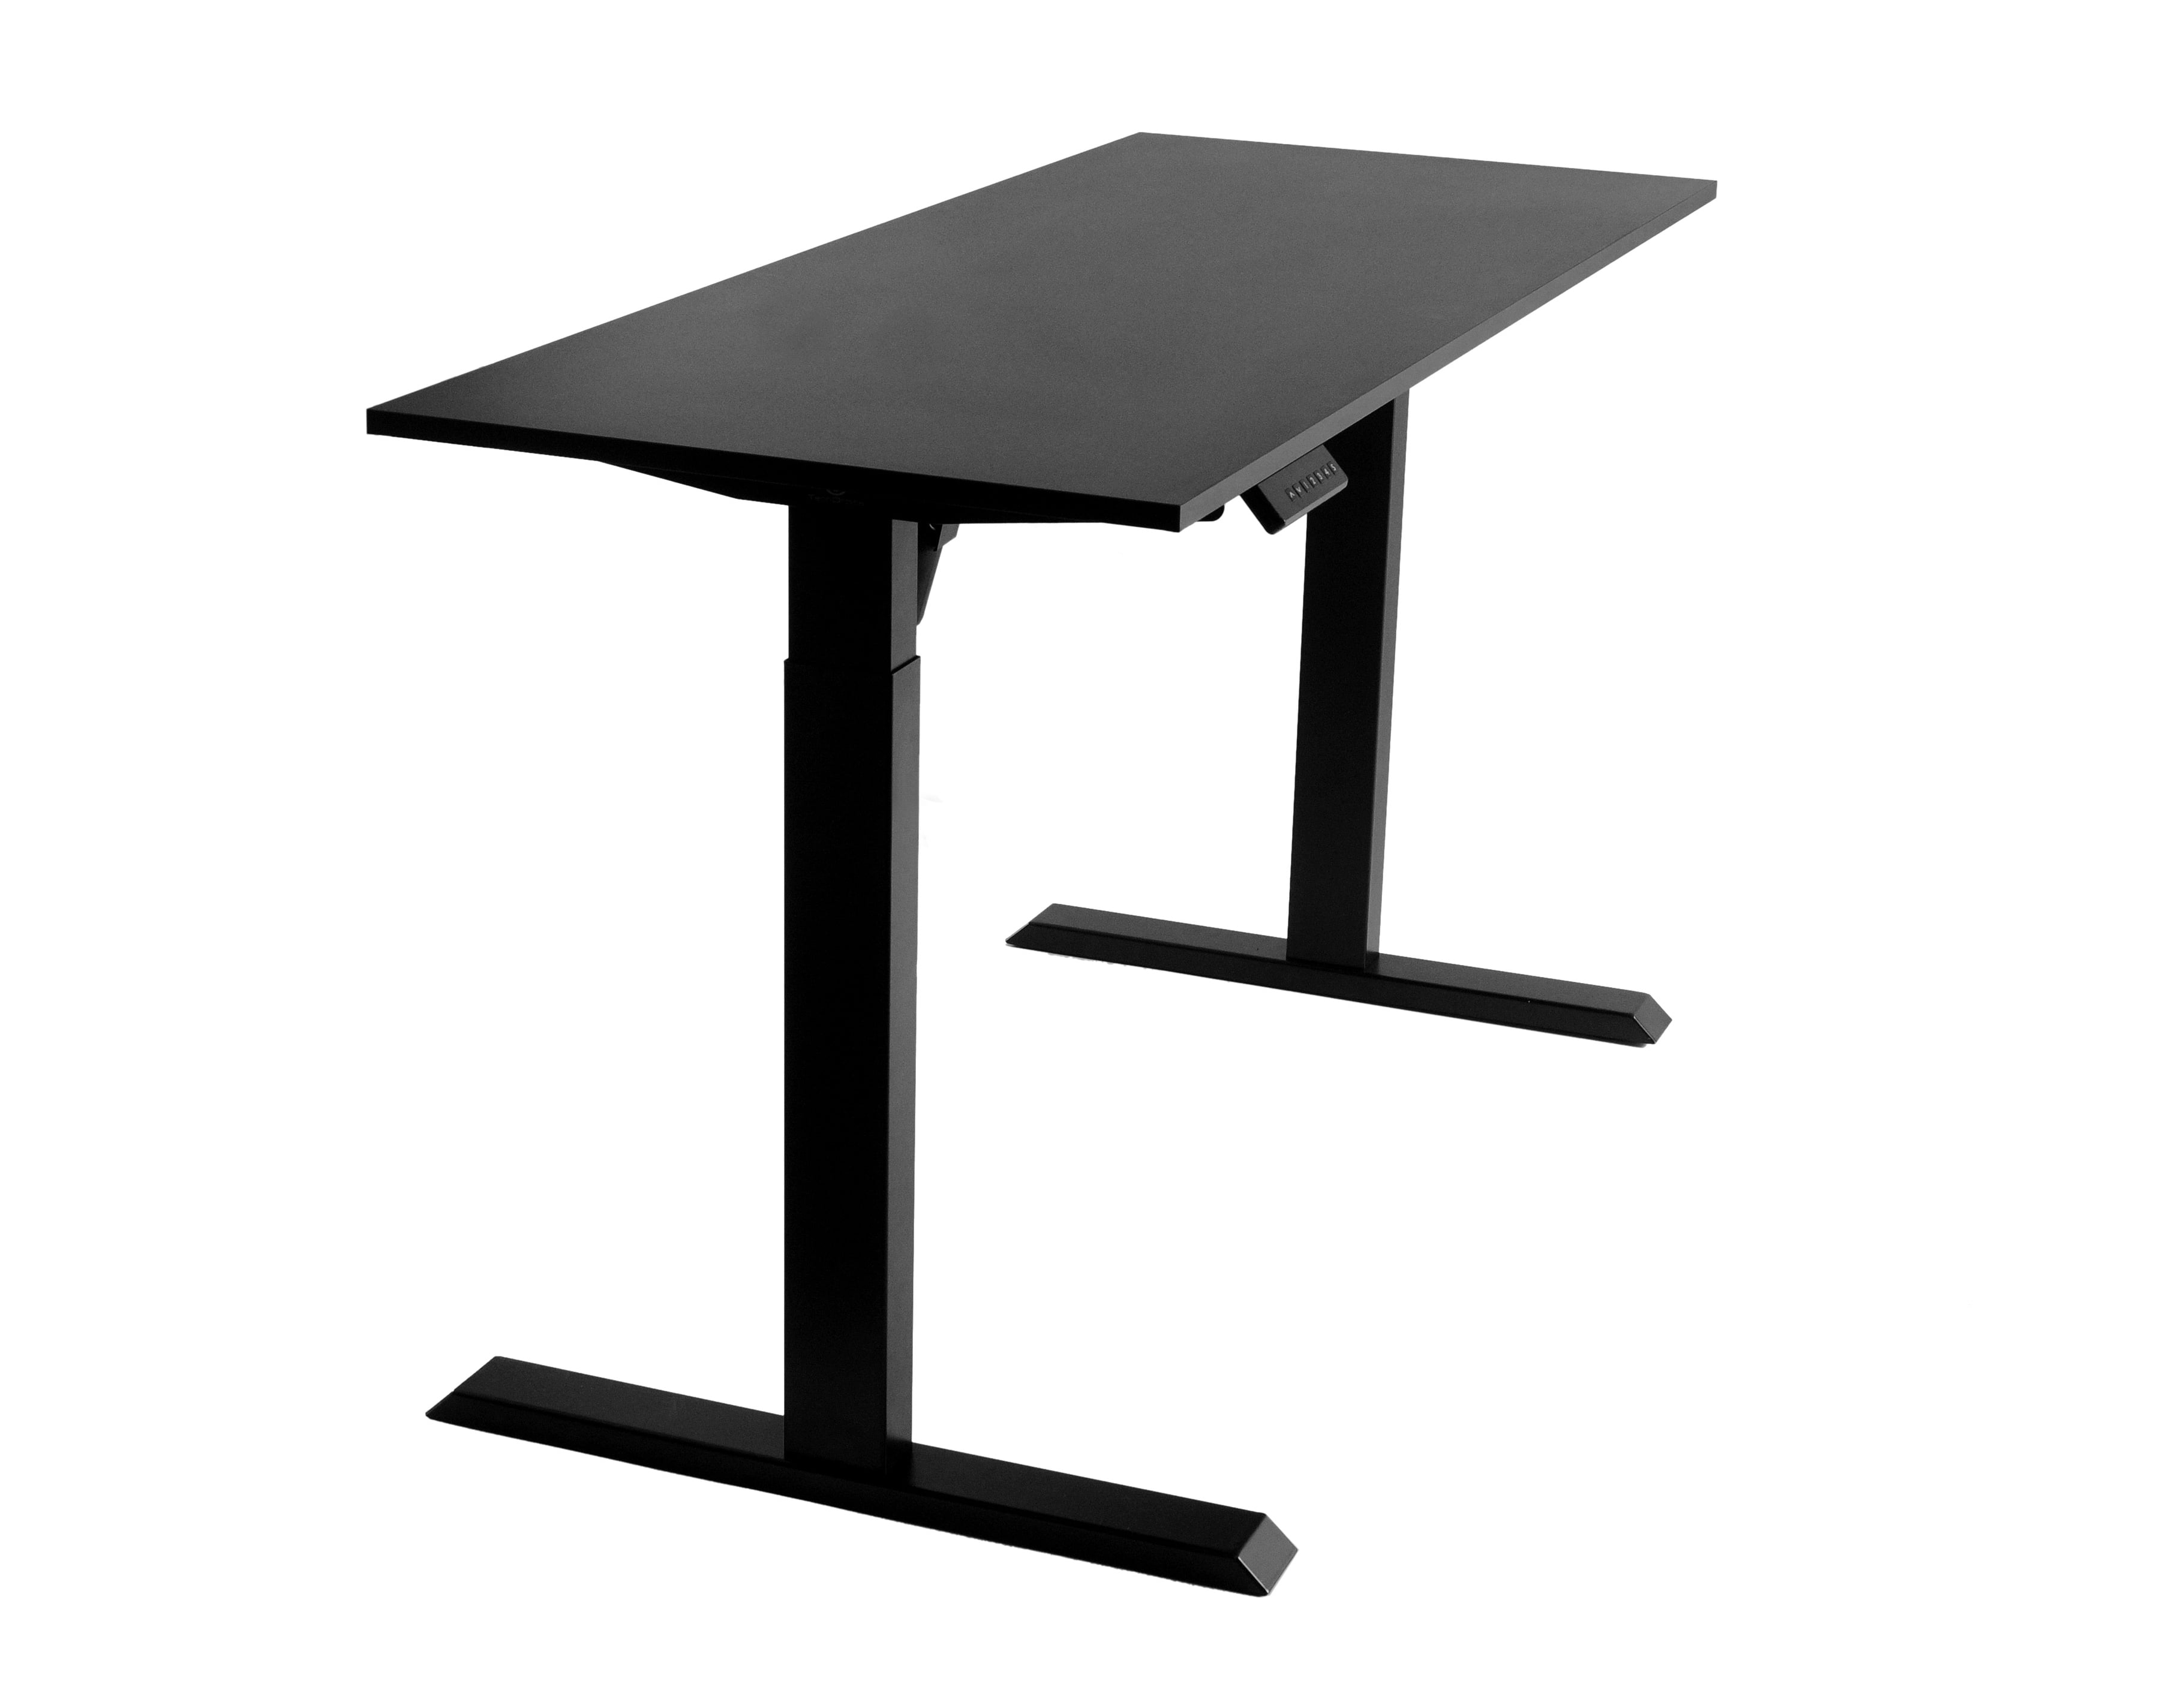 Photo 1 of TechOrbits Electric Standing Desk Frame With 60 x 24 Inc Tabletop - Motorized Workstation Two Leg Stand Up Desk With Memory Settings And Telescopic Sit Stand Height Adjustment